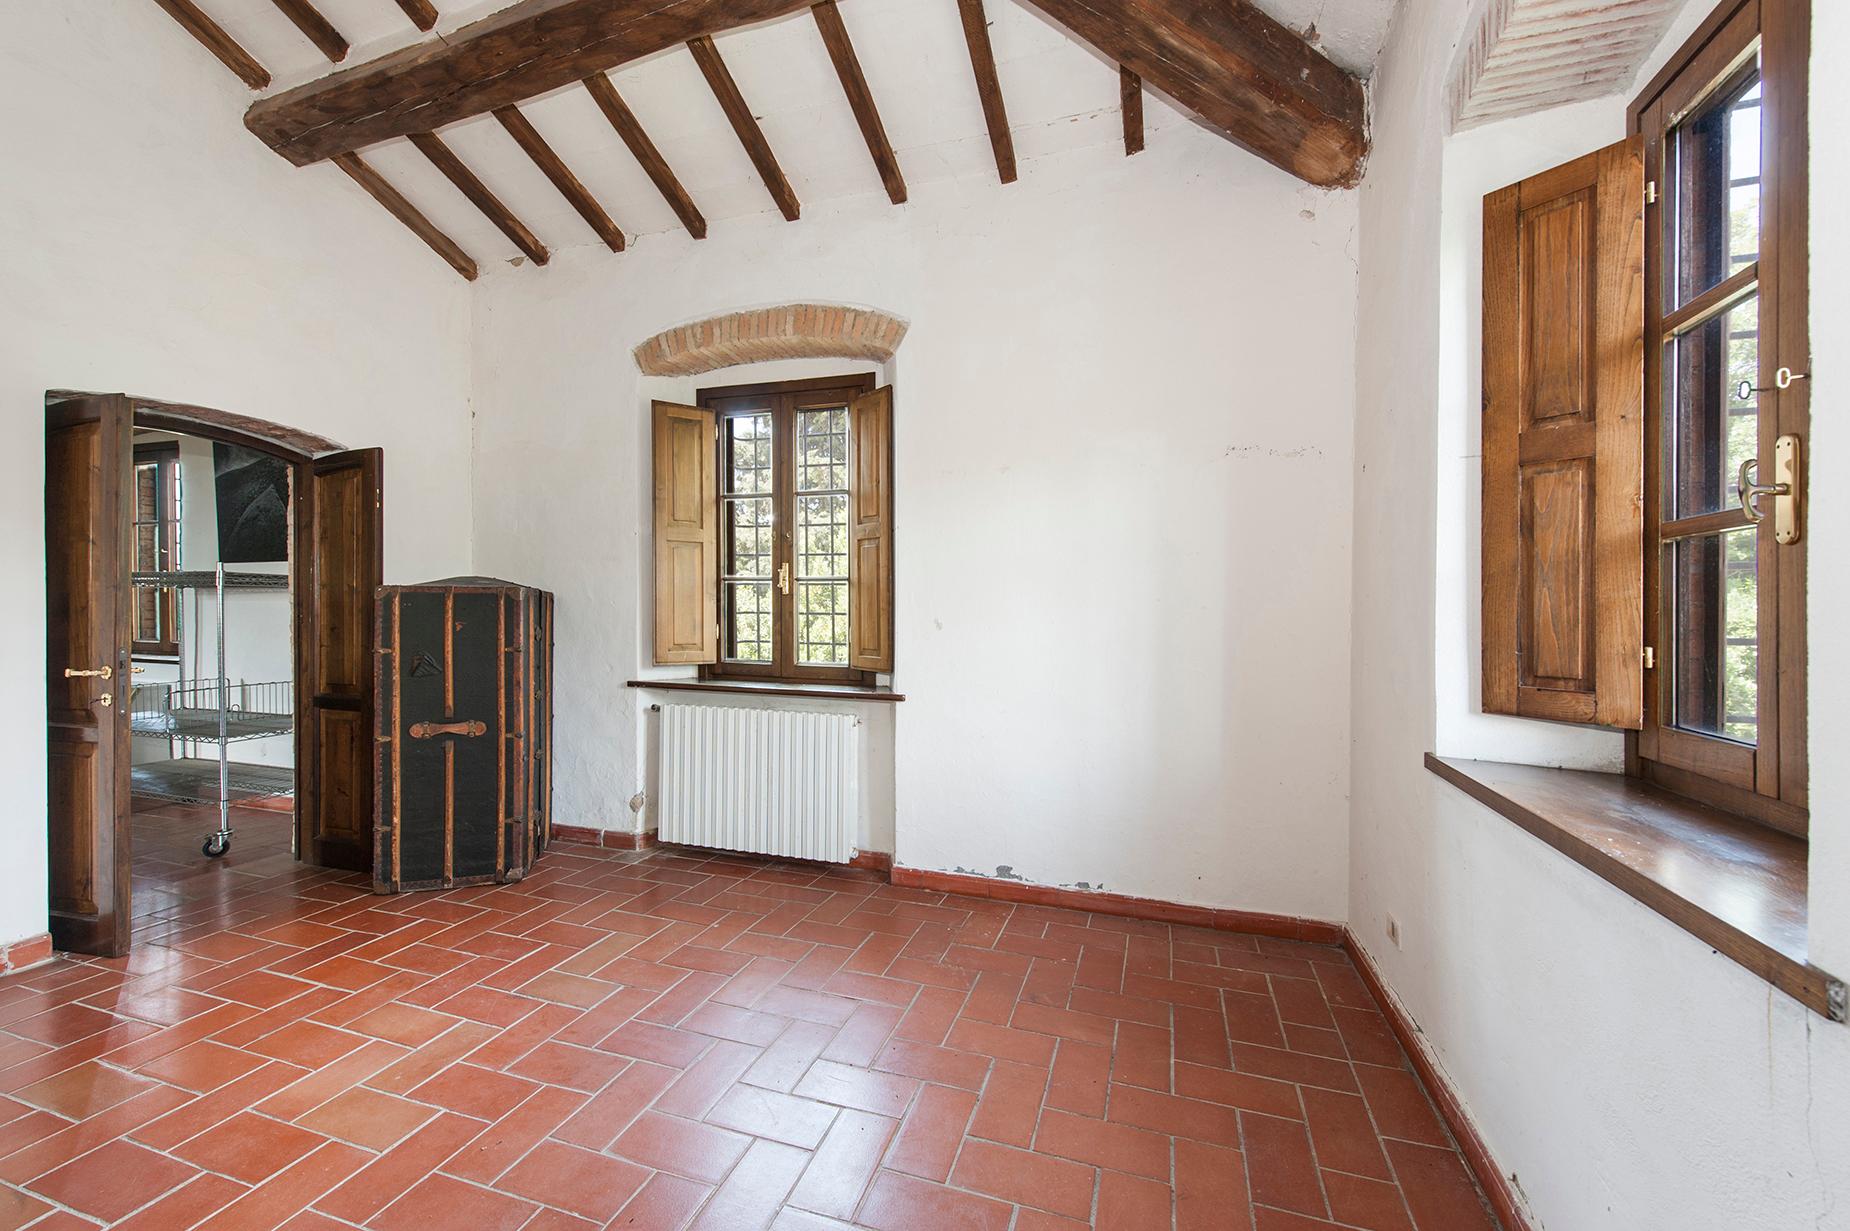 Ancient farmhouse with private land in Maremma - 14